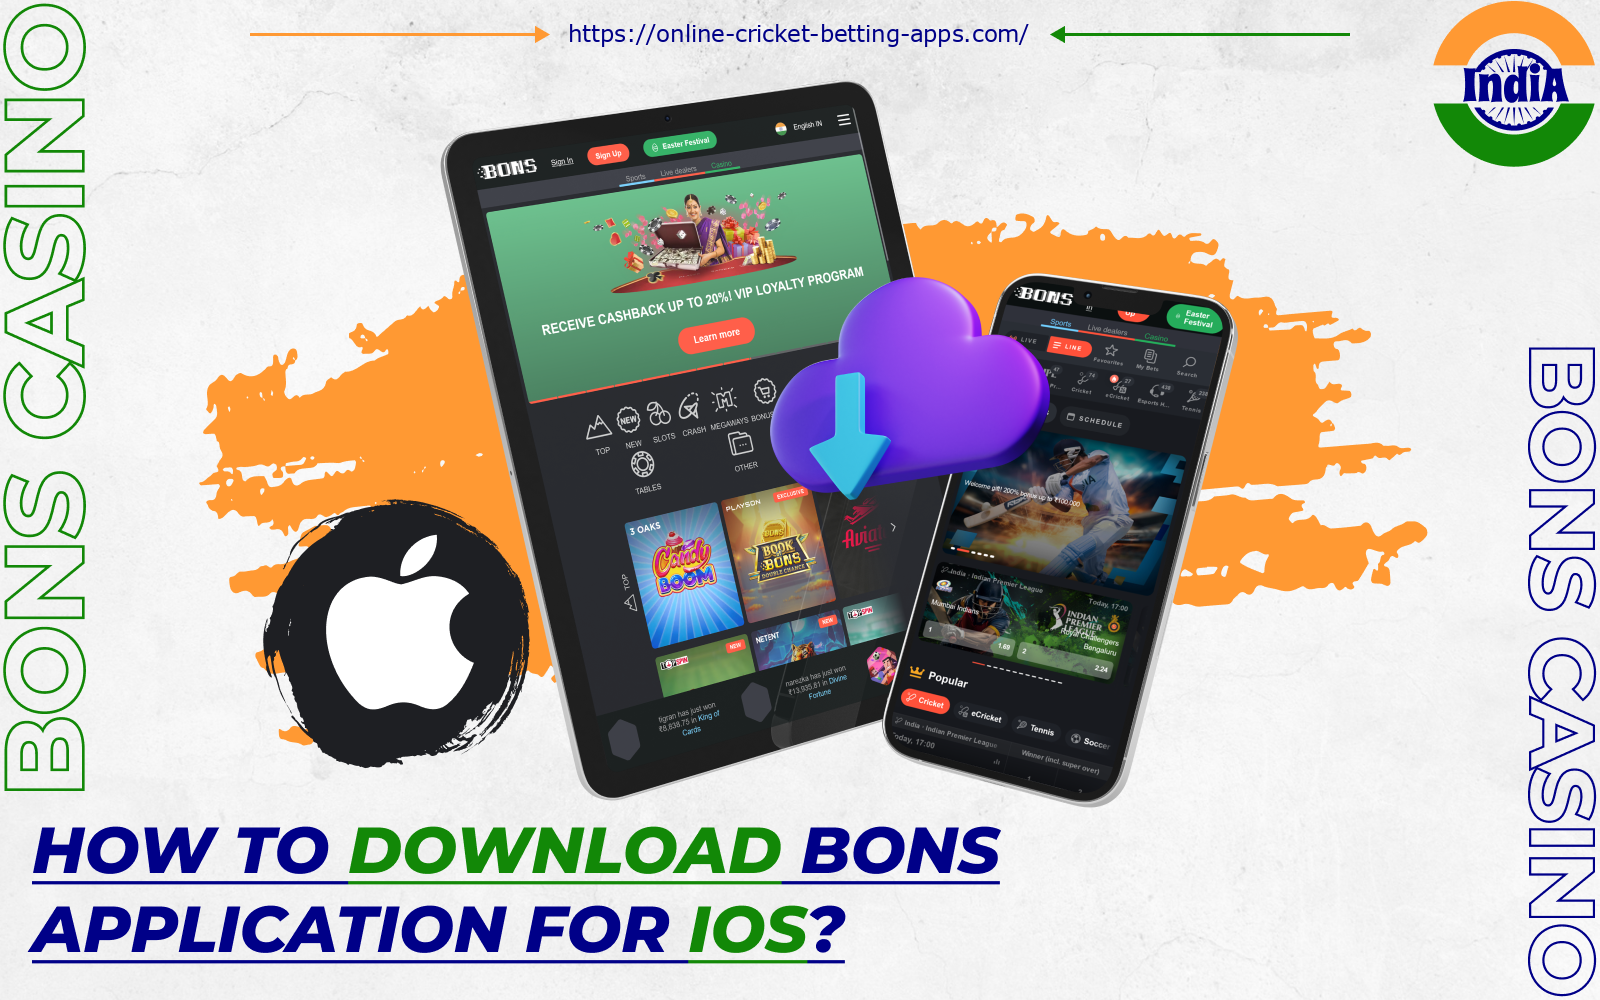 For iOS devices, Bons Casino has developed a progressive web app that gives players from India access to all casino games and sports betting games